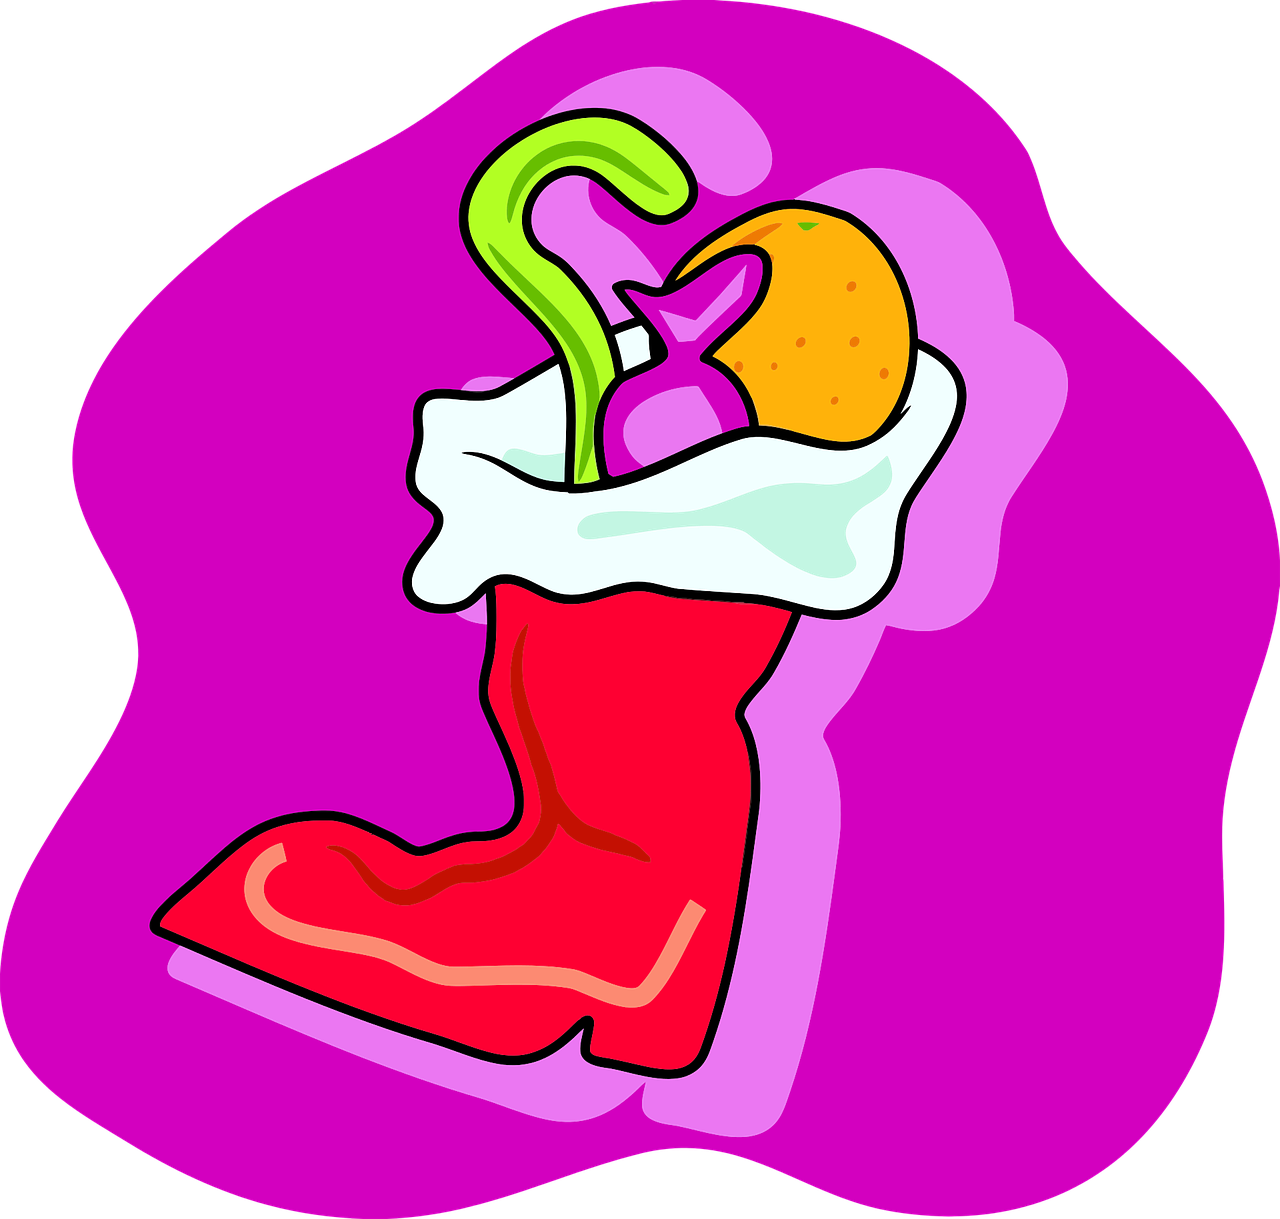 a christmas stocking filled with fruit and vegetables, a digital rendering, by Romero Britto, pixabay, pop art, riding boots, material is!!! plum!!!, miscellaneous objects, rainy